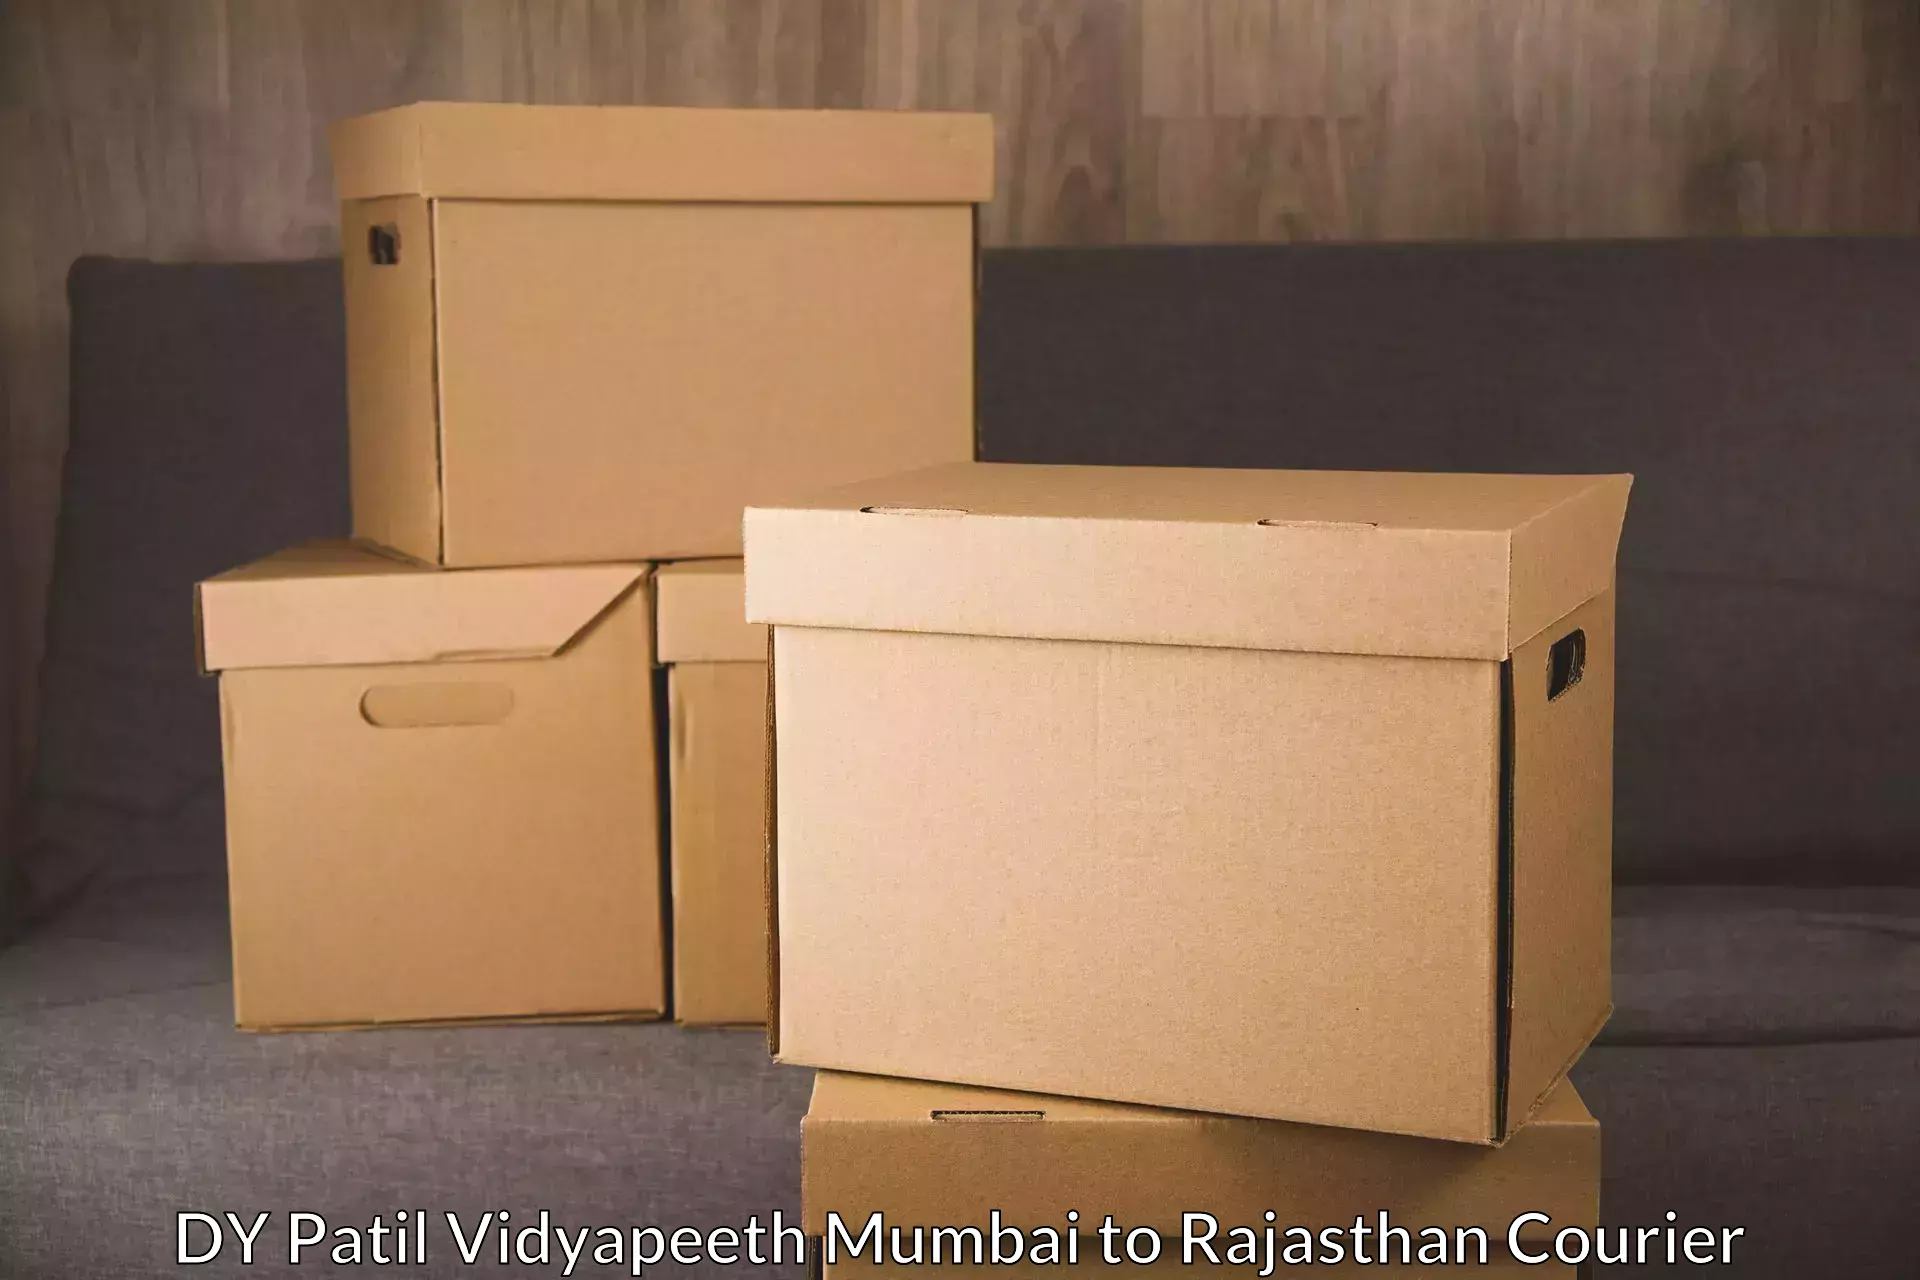 Package delivery network DY Patil Vidyapeeth Mumbai to Shrimadhopur